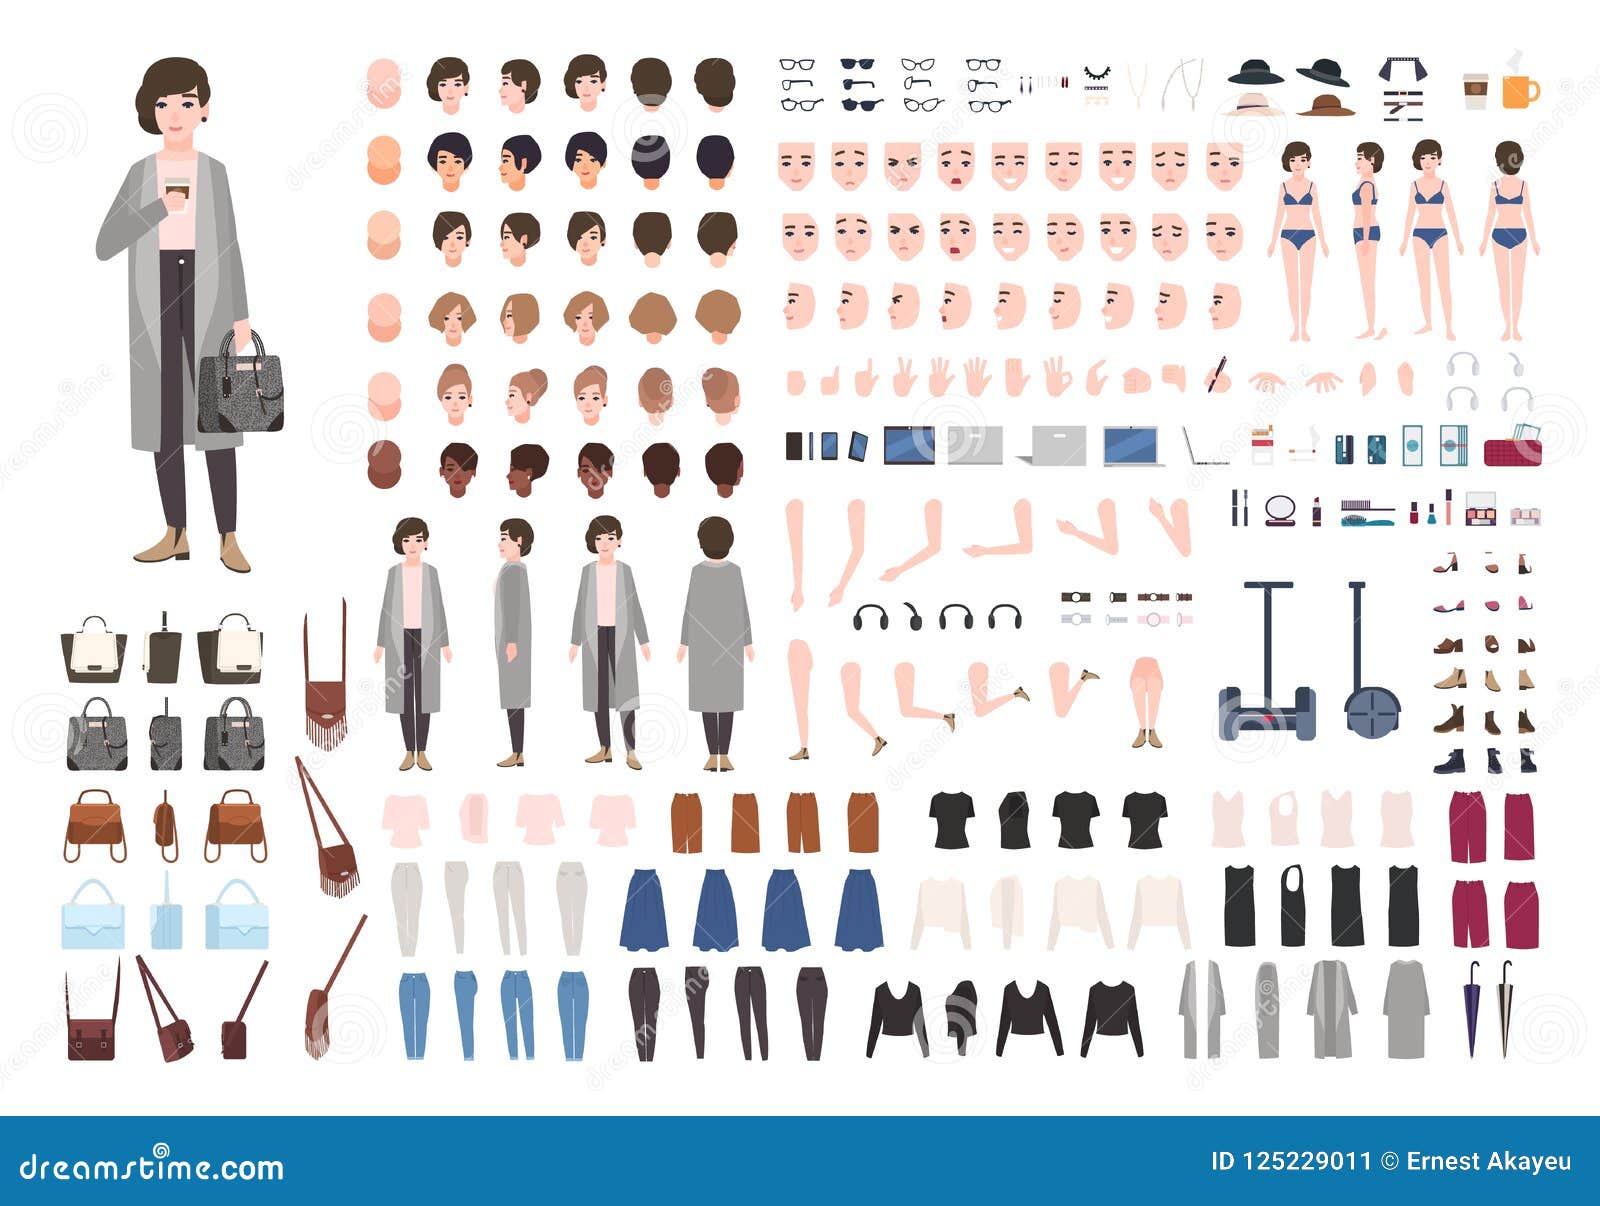 modern young woman or yuppie animation kit. collection of female body parts in different postures, haircuts, trendy